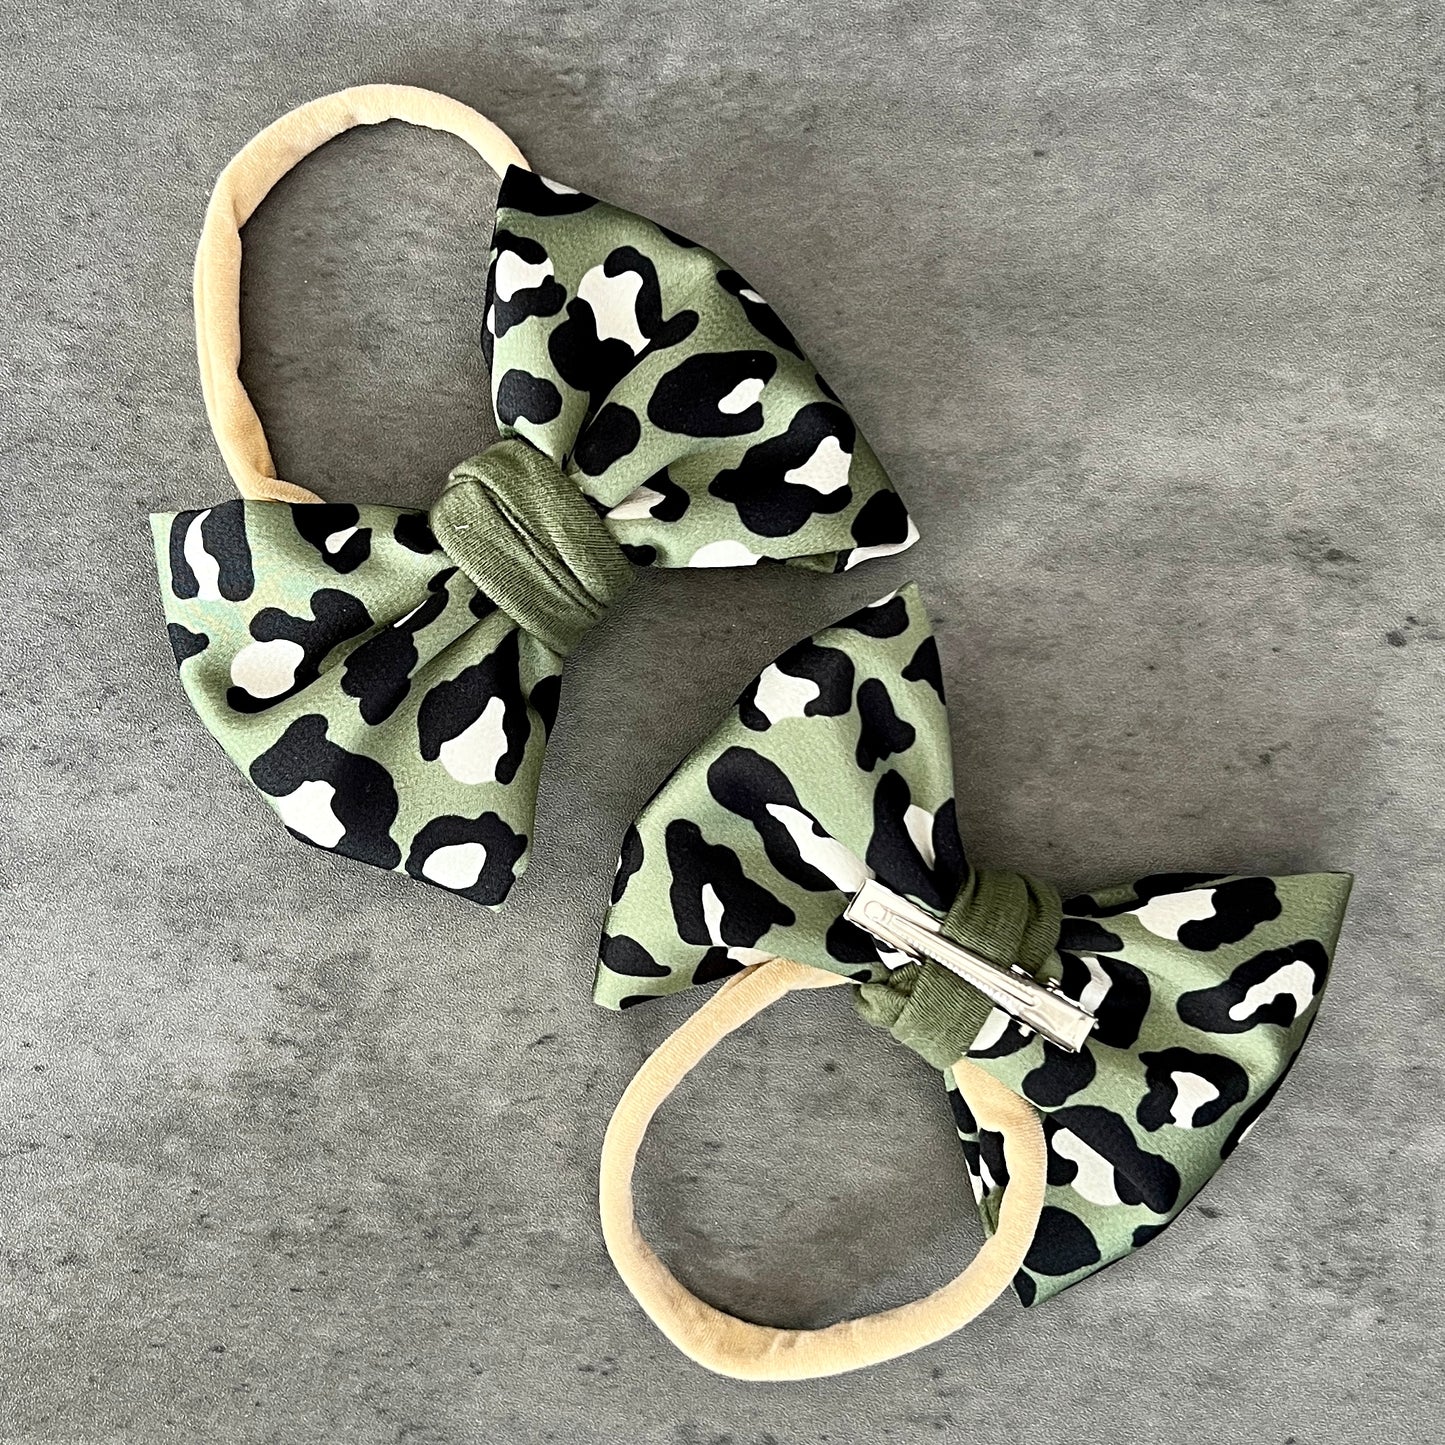 Olive Green Leopard Print Sporty Crop Tee (matching Girl's Hair Bow)